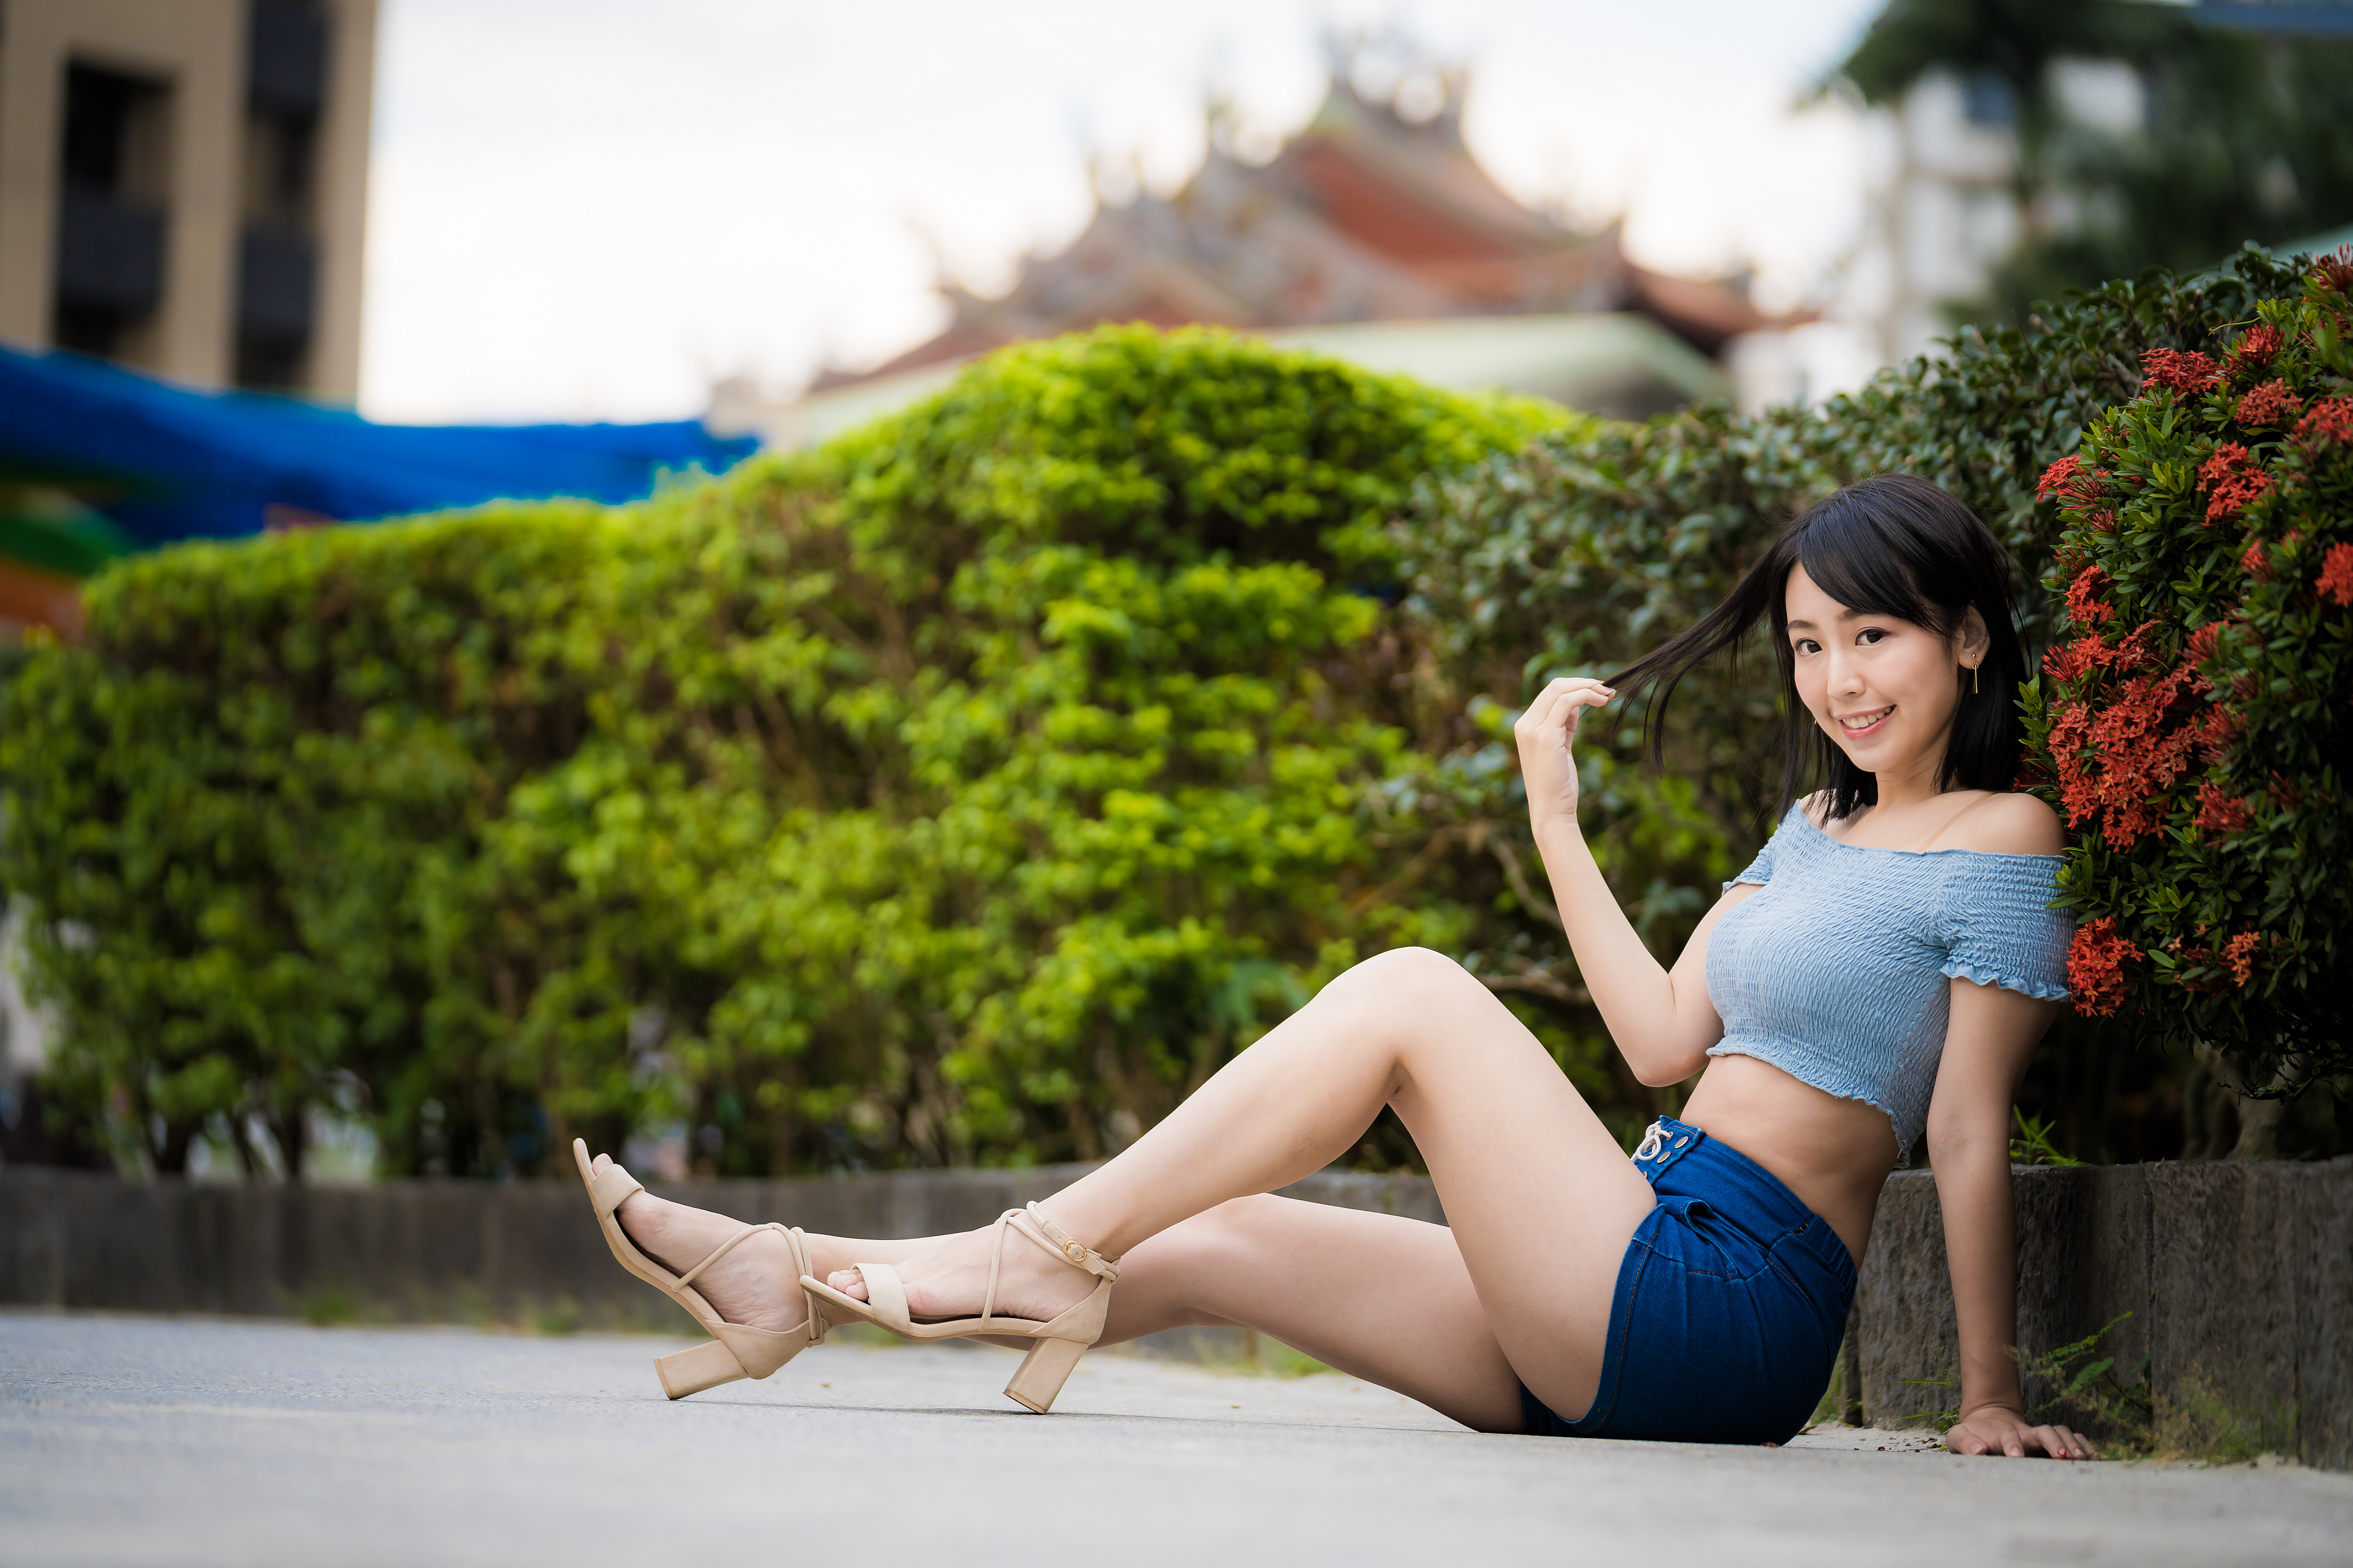 Women Face Asian Legs Bare Shoulders On The Ground 4562x3041